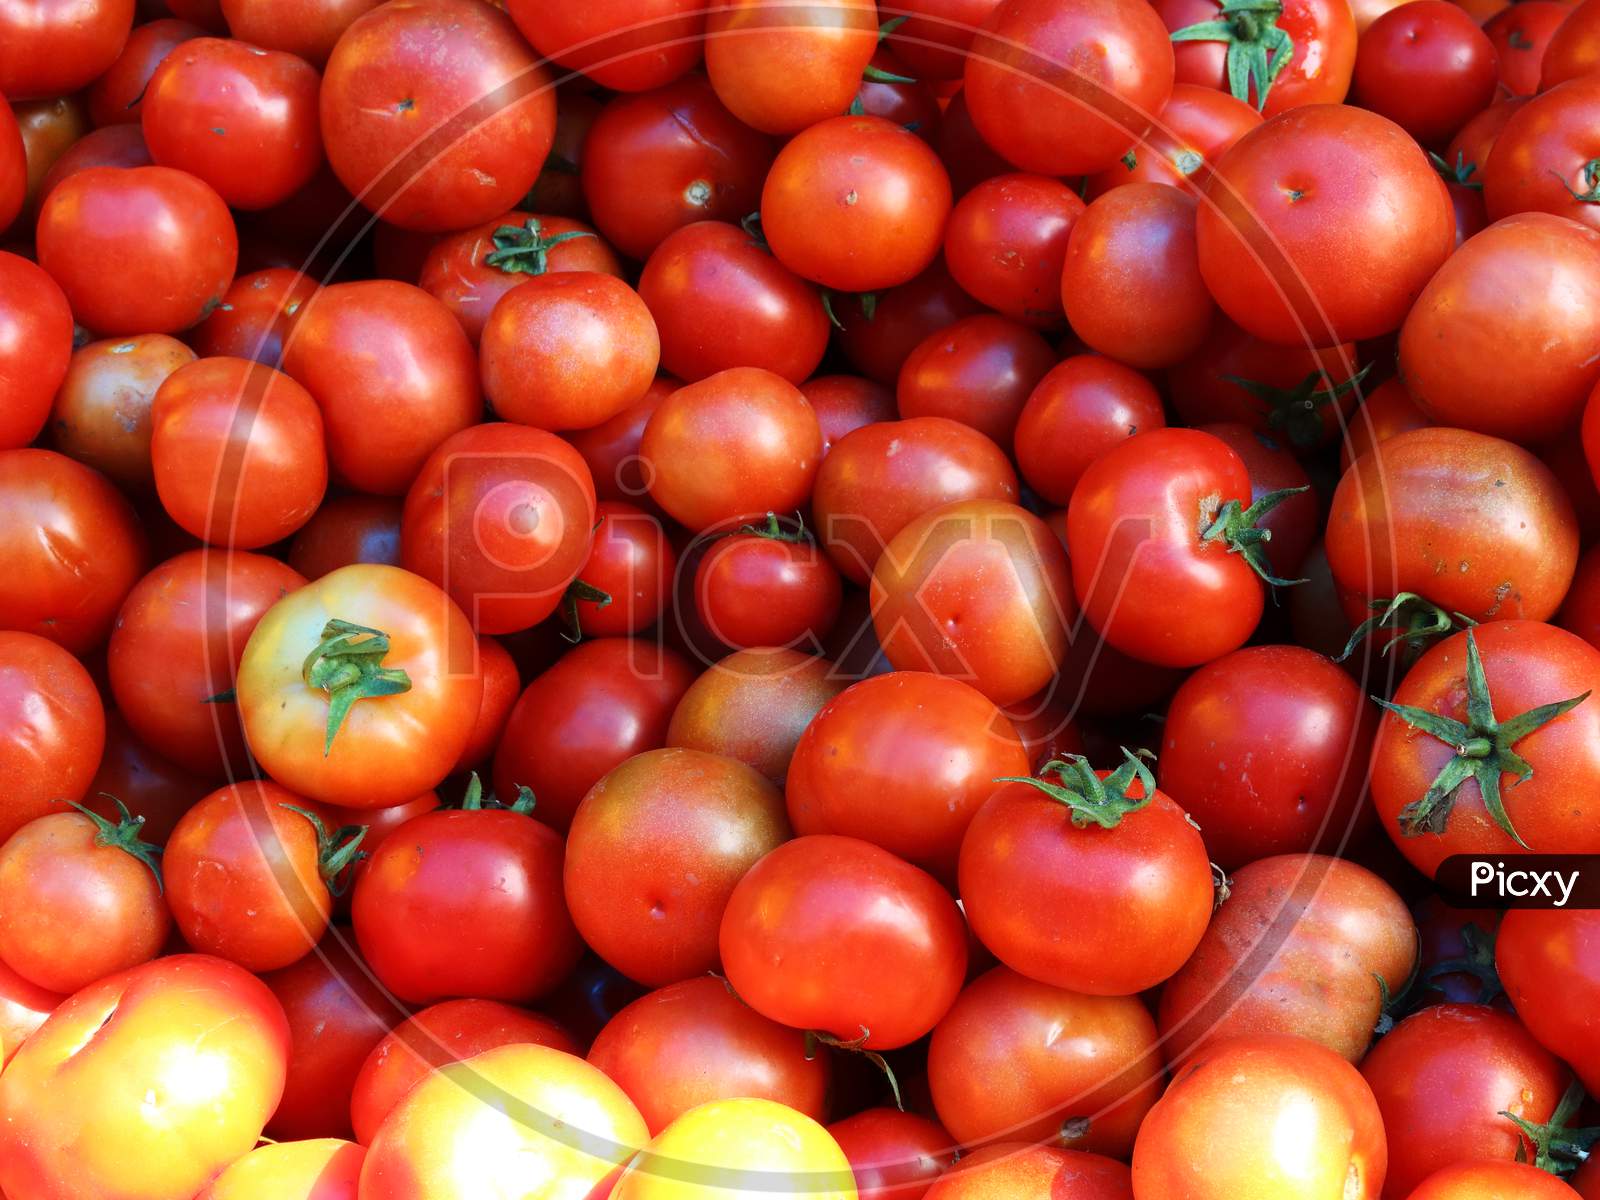 Red country tomato in local vegetable market in India